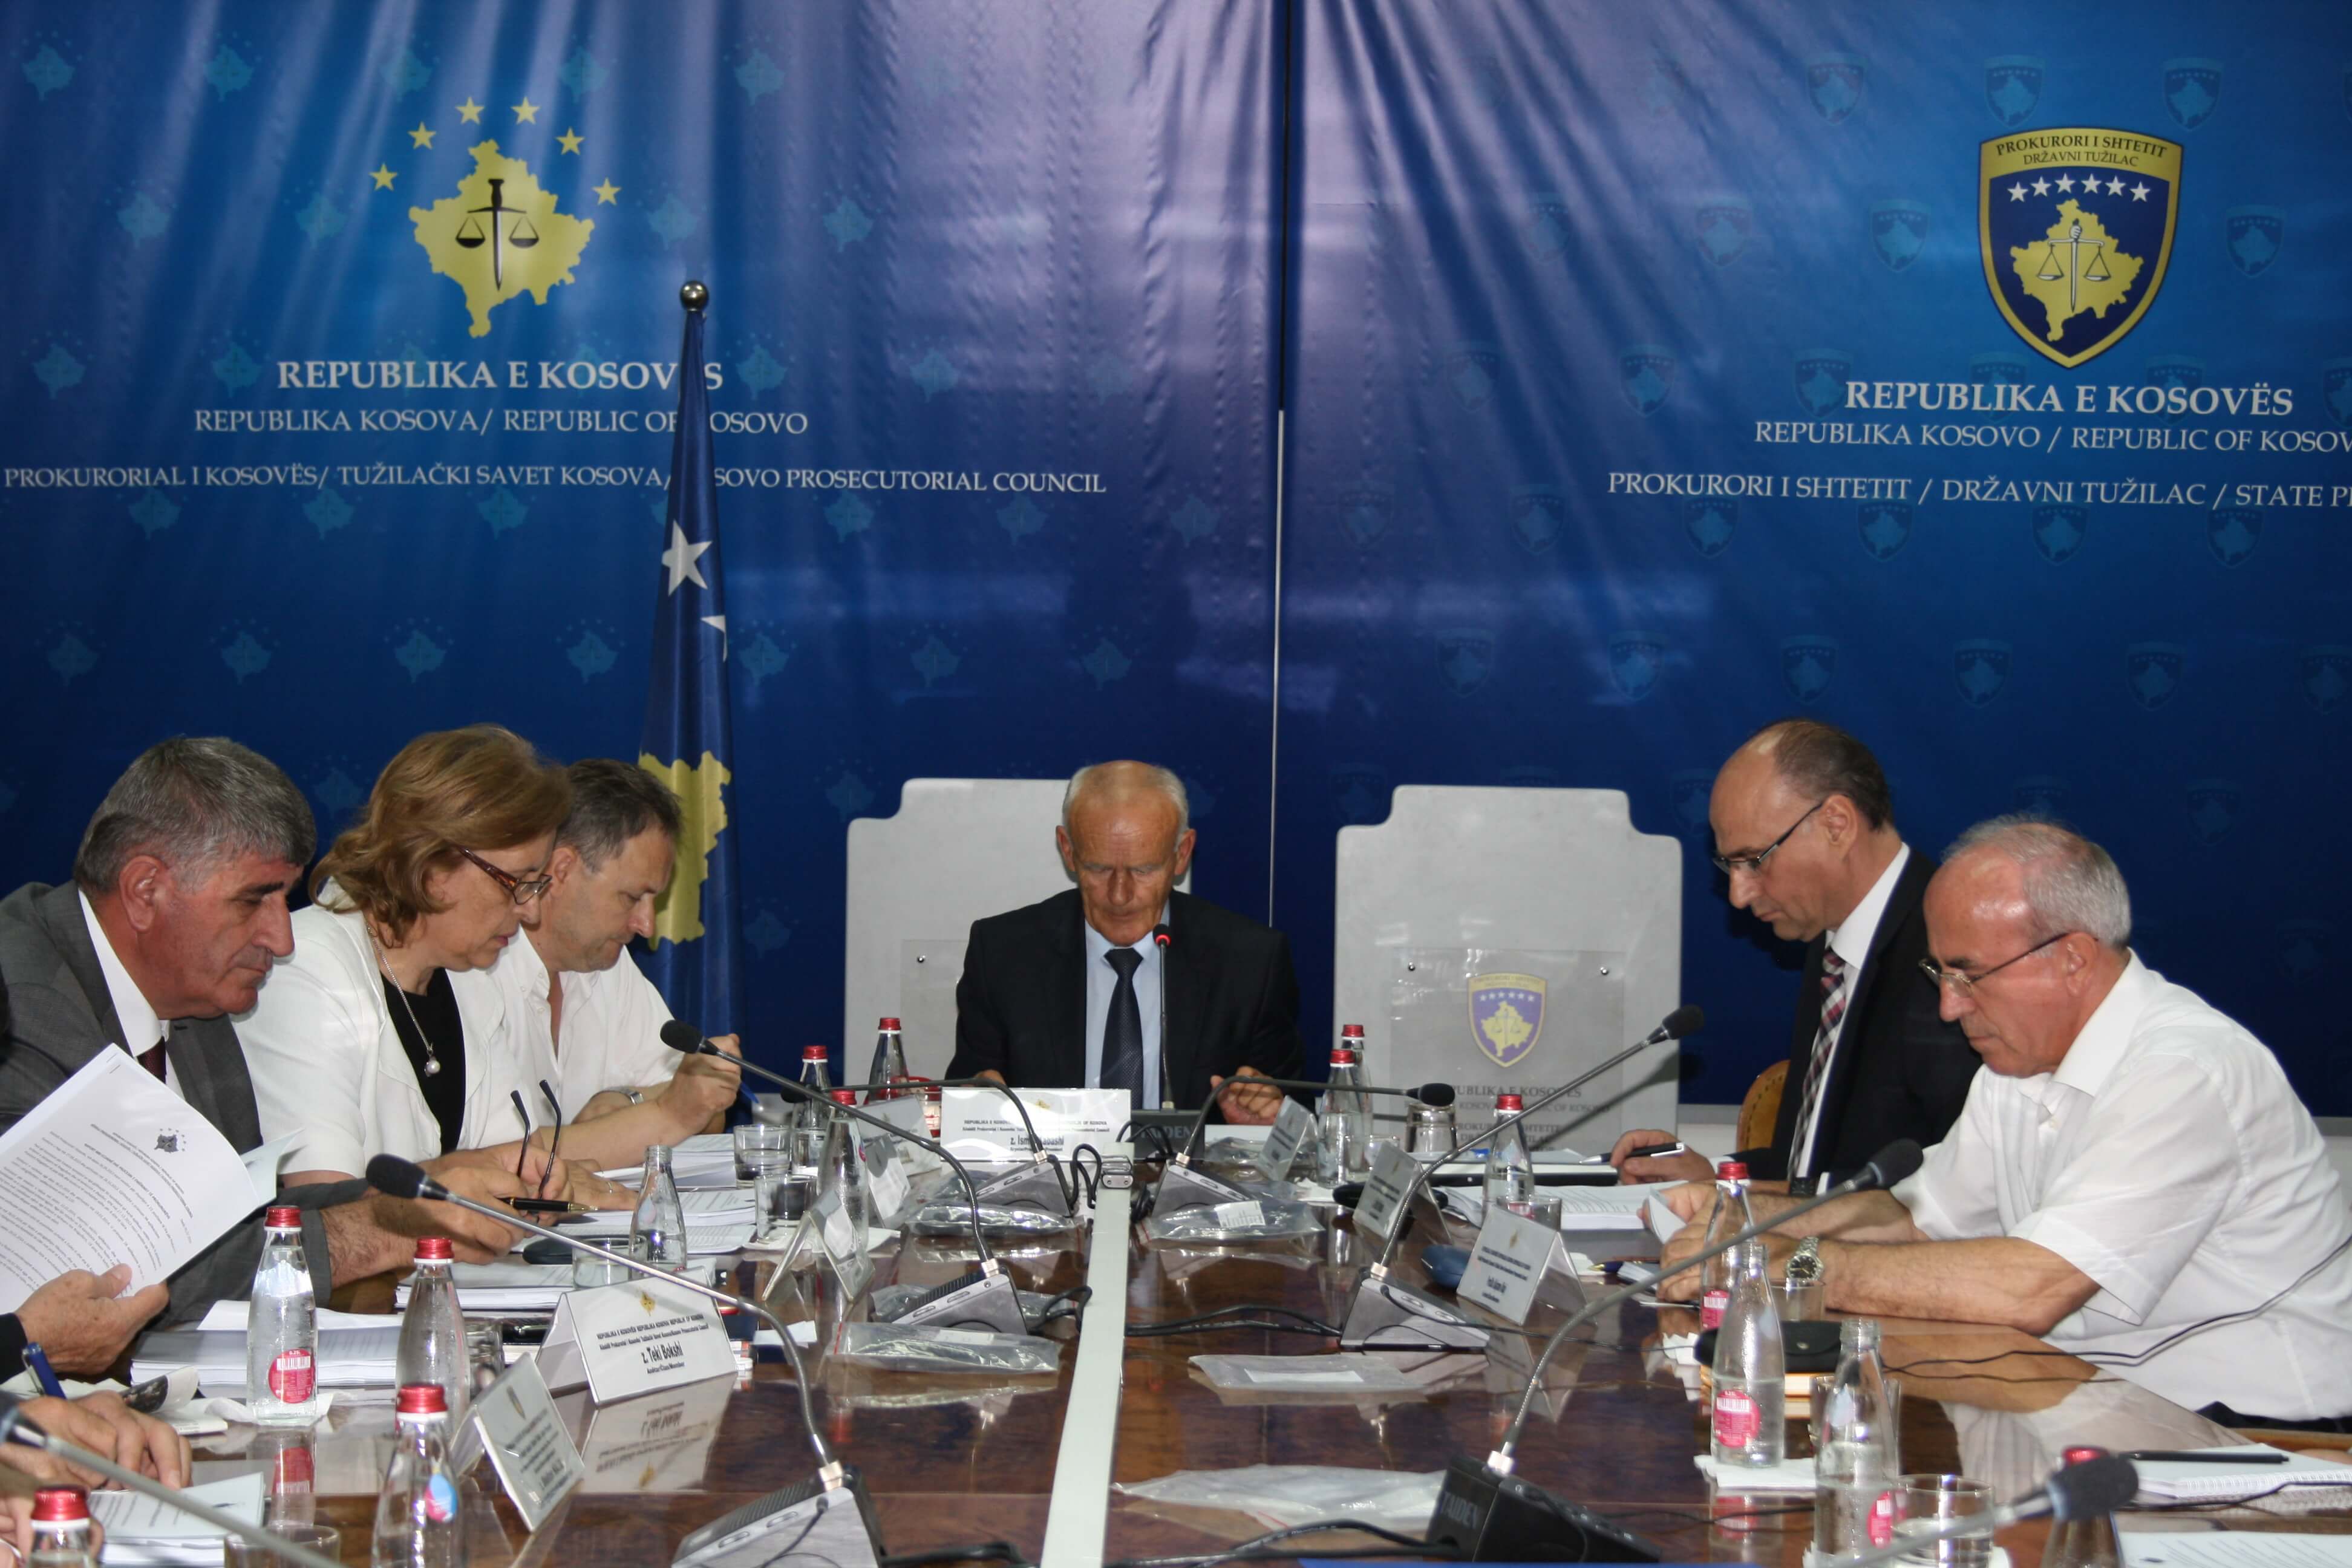 THERE WAS HELD THE NEXT MEETING OF KOSOVO PROSECUTORIAL COUNCIL, 18TH OF JULY